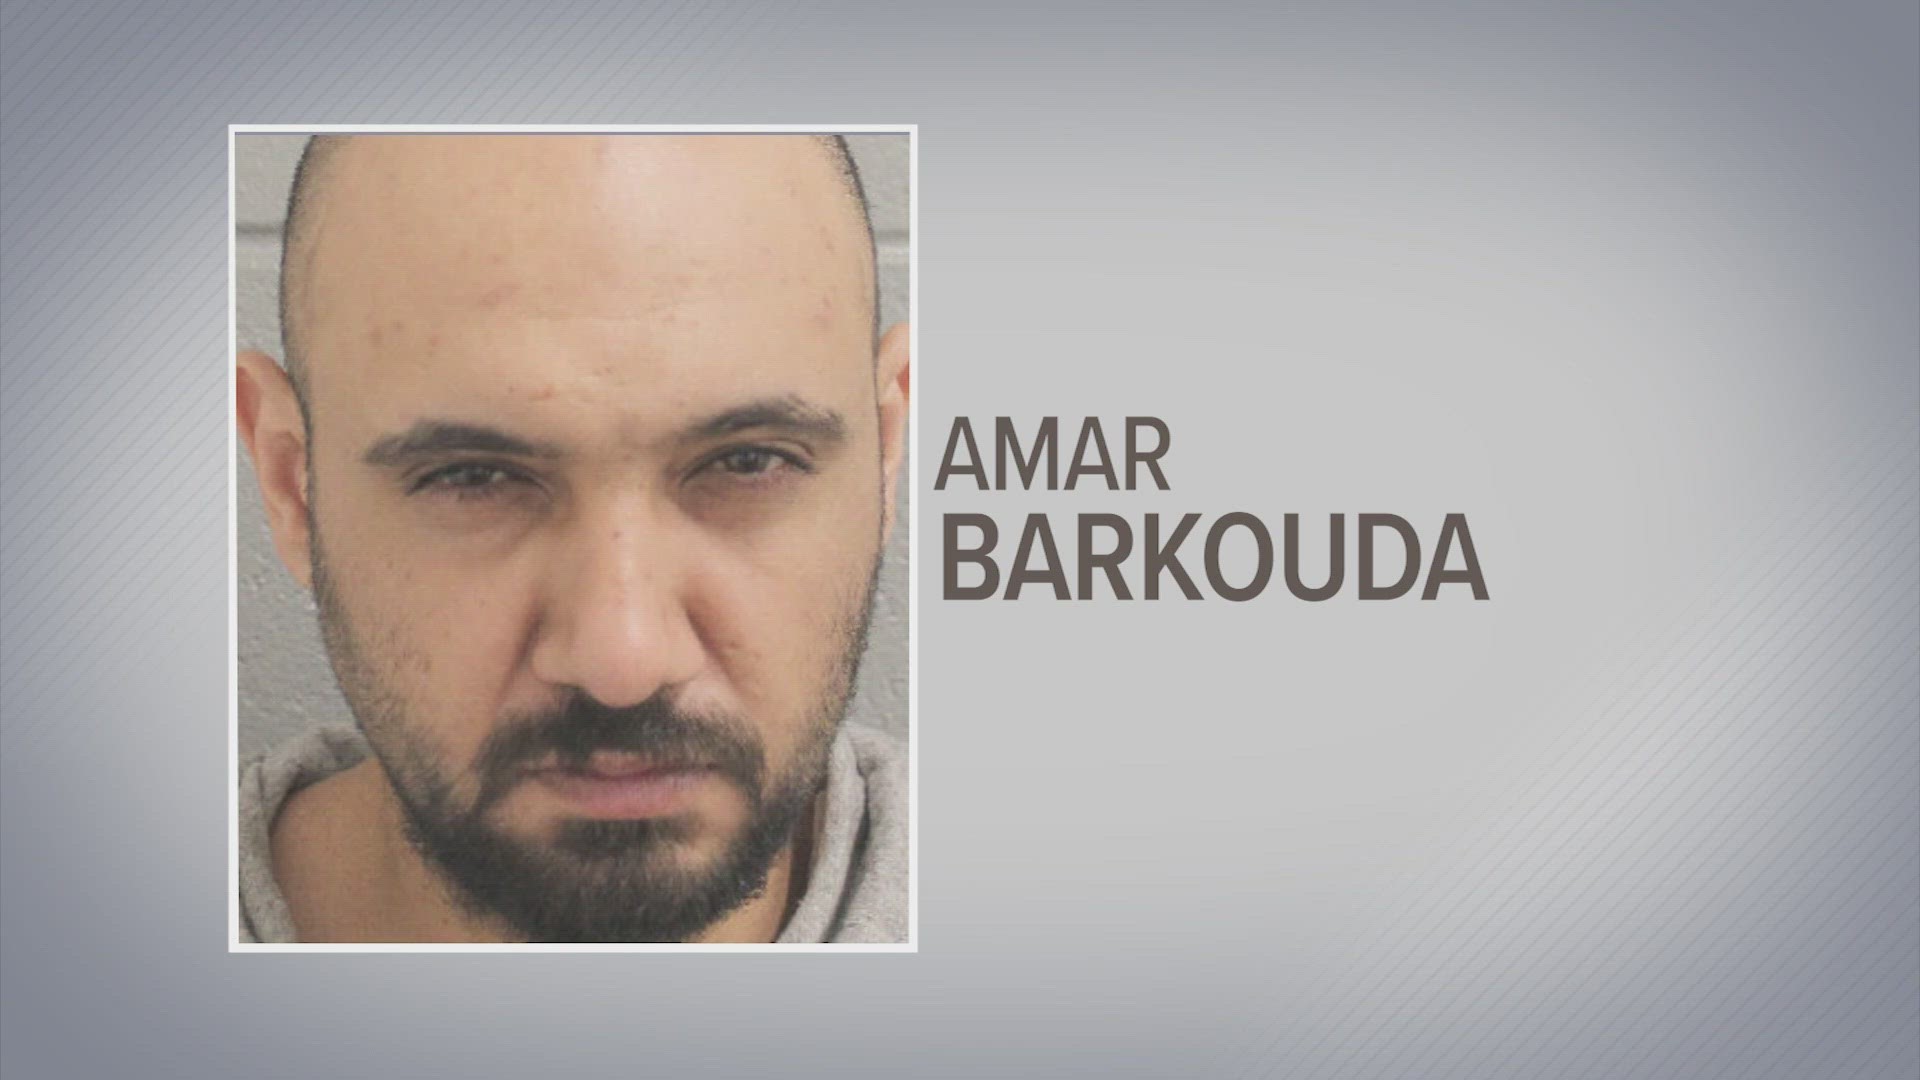 Bellaire police arrested Amar Barkouda after two calls Thursday morning. He's the same man police said was in a suspect in other cases the two days before.